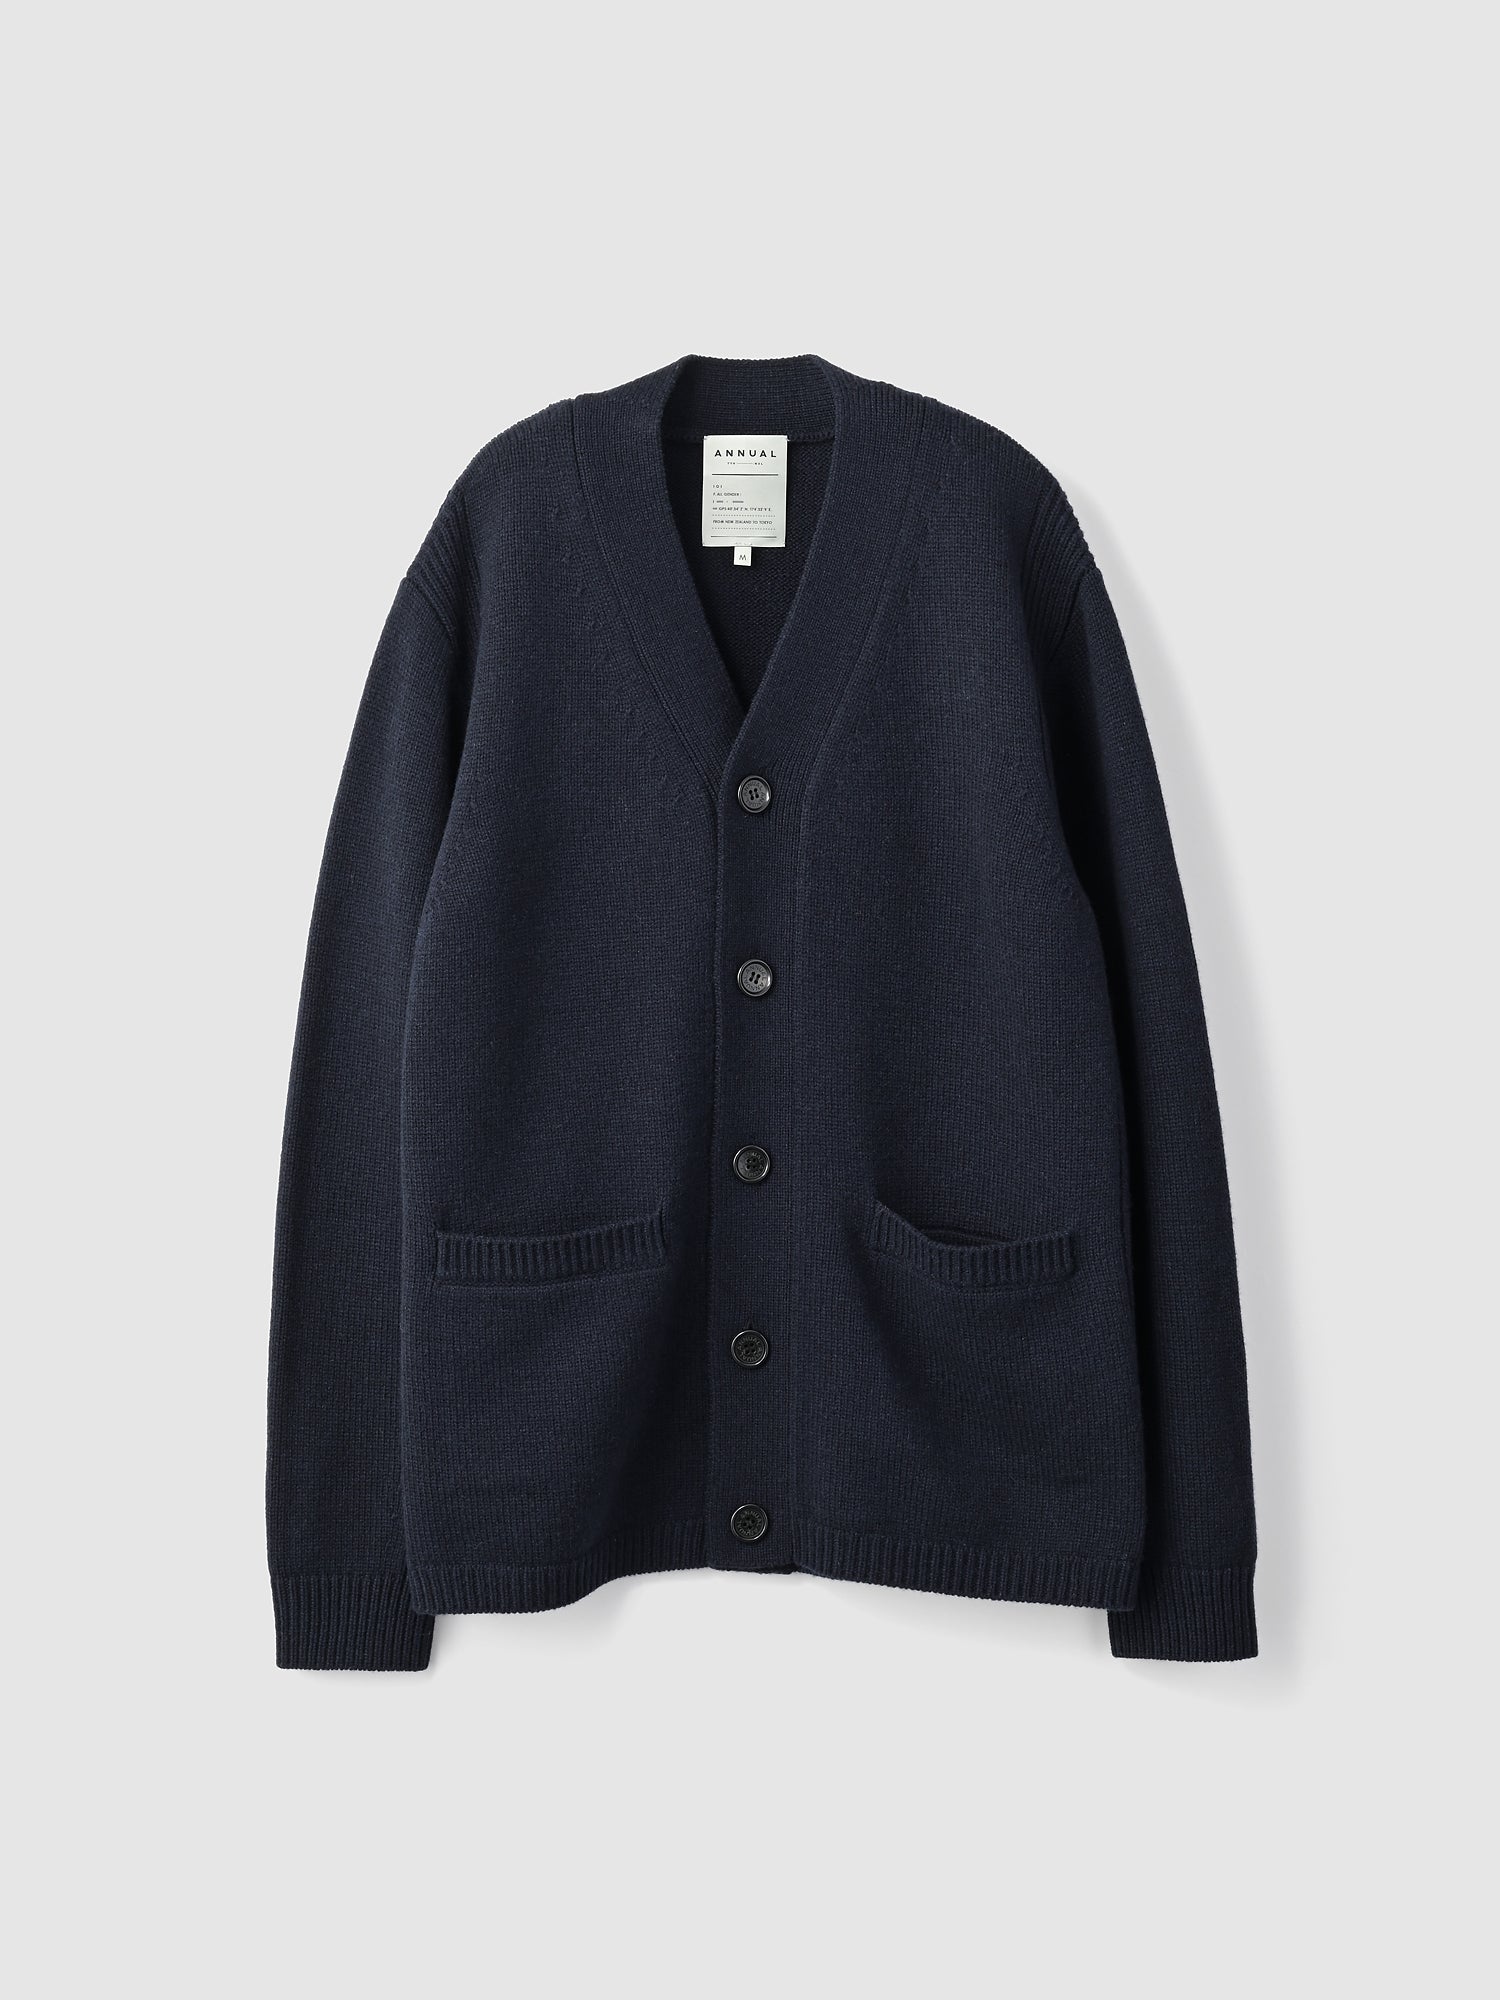 【SON OF THE CHEESE】Line Cardigan カーディガン